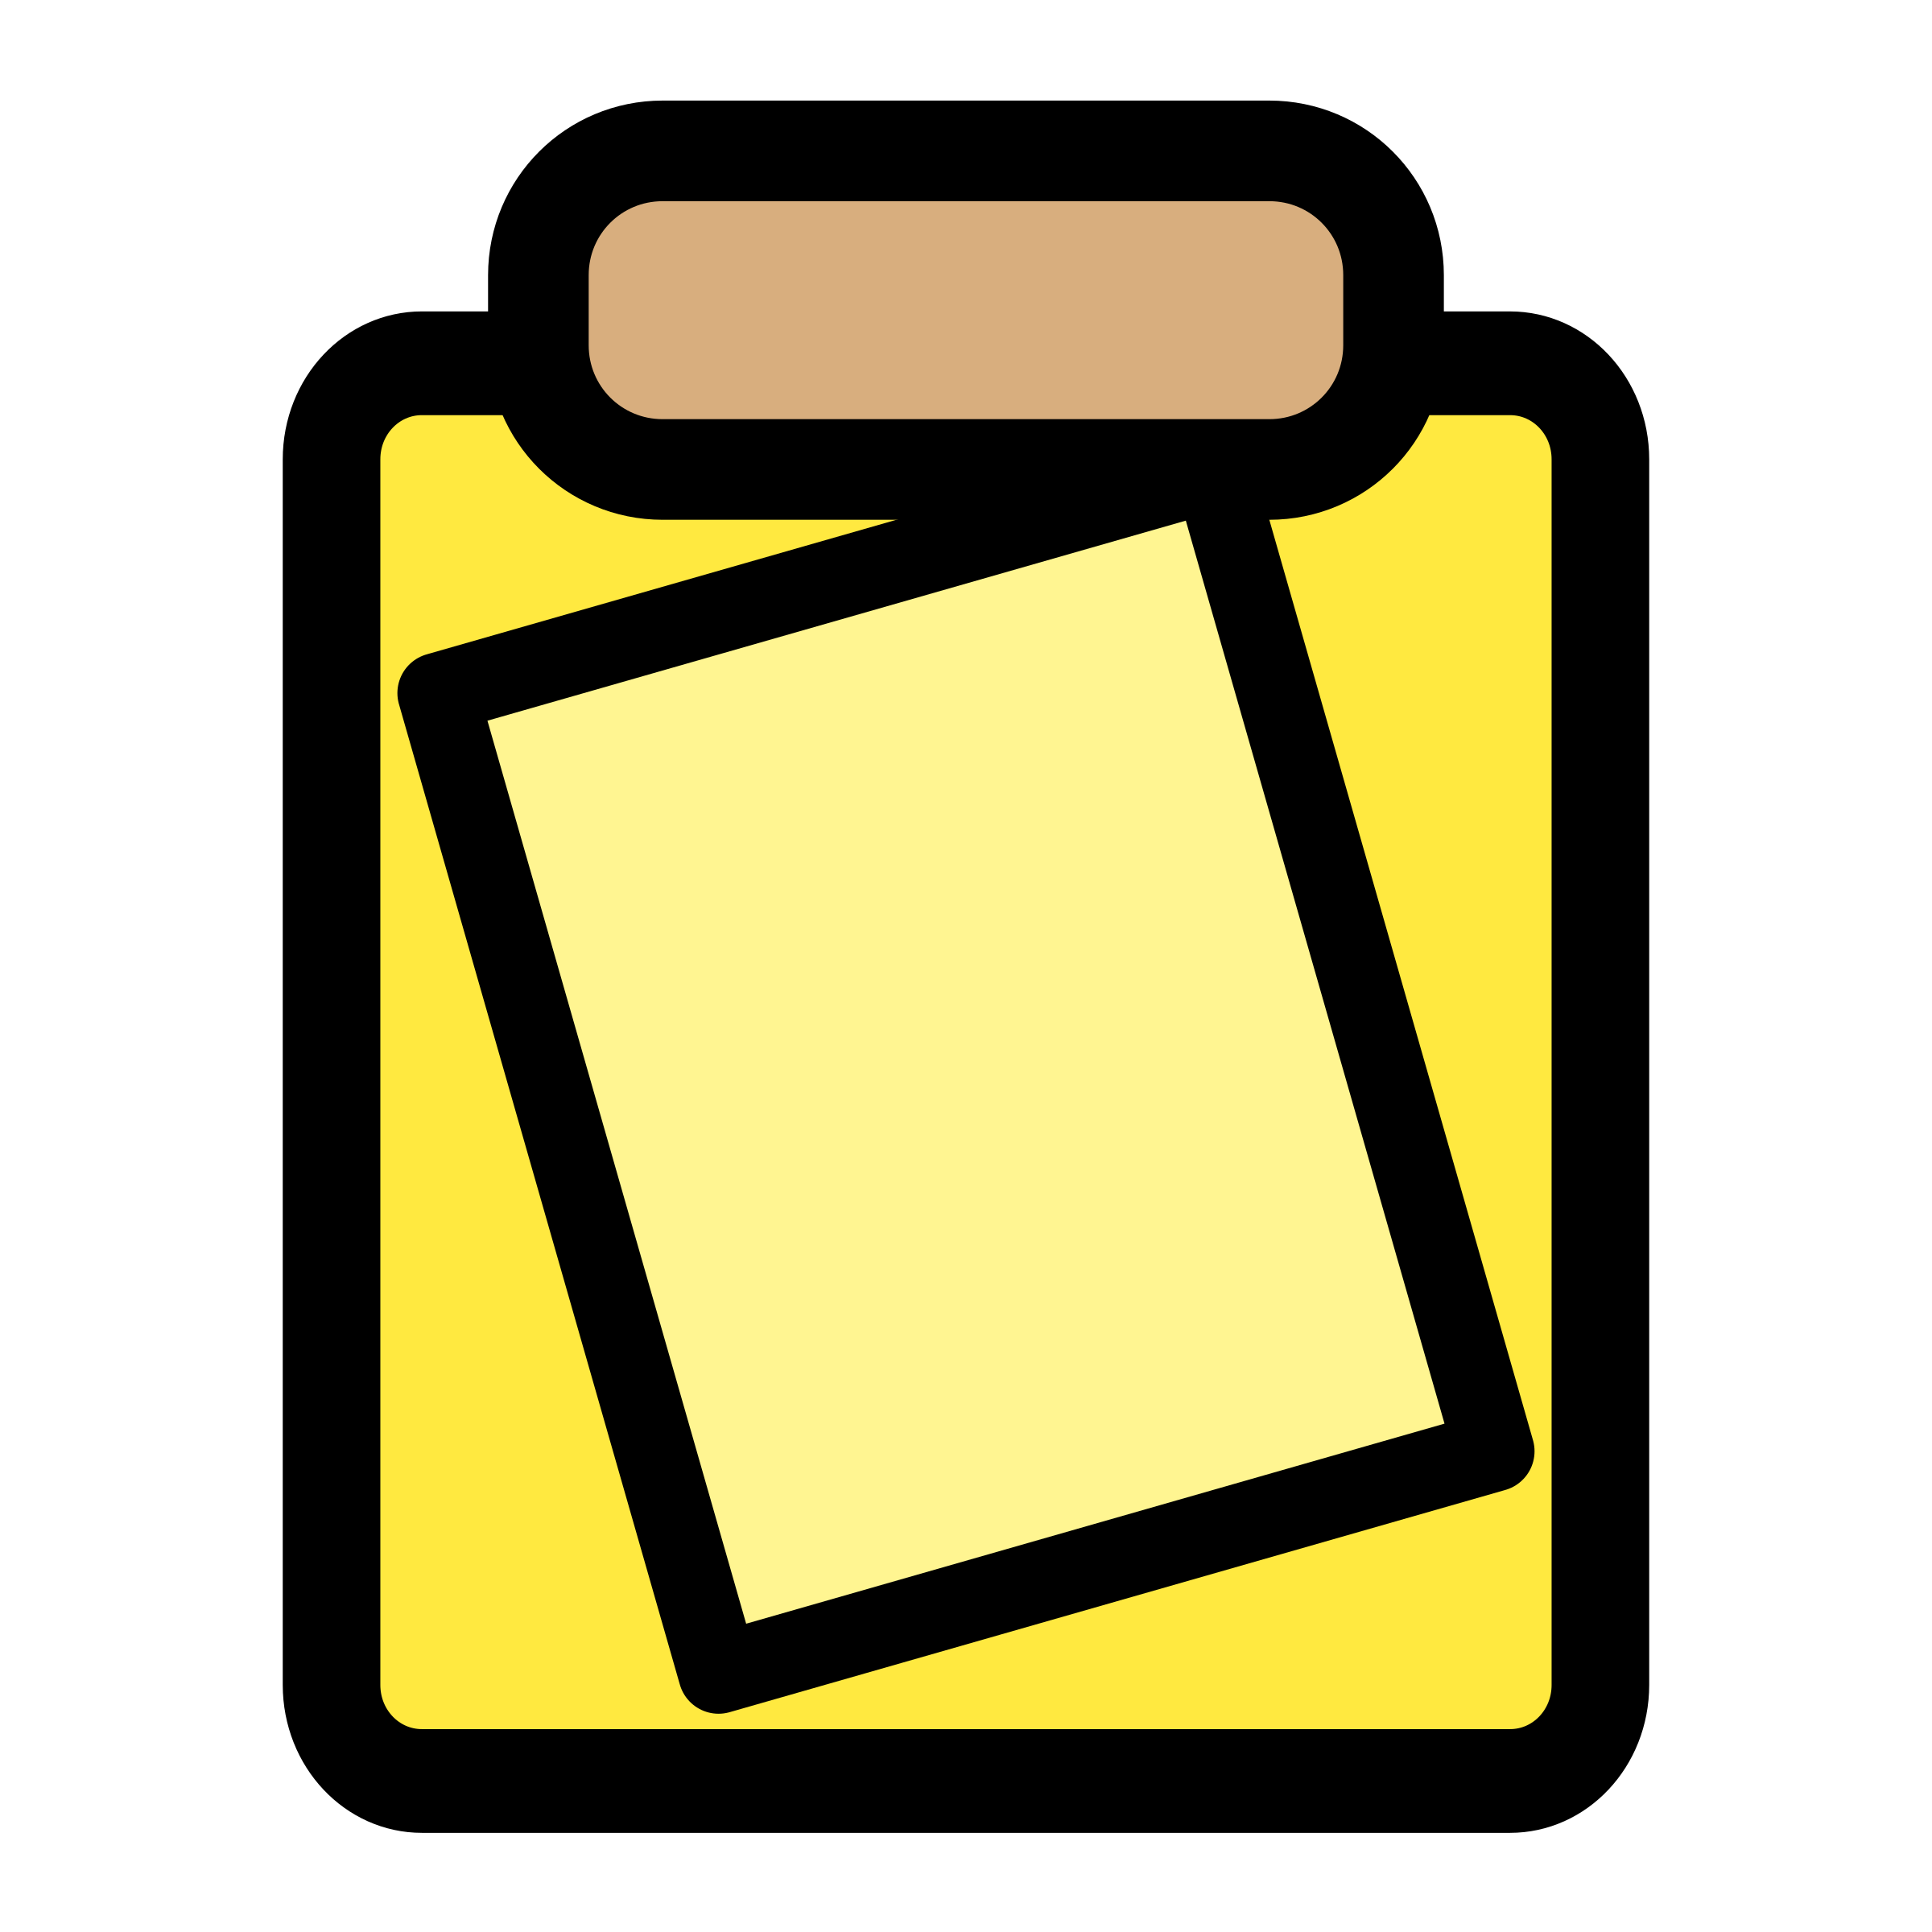 Primary tool icons png. Clipboard clipart ruled paper